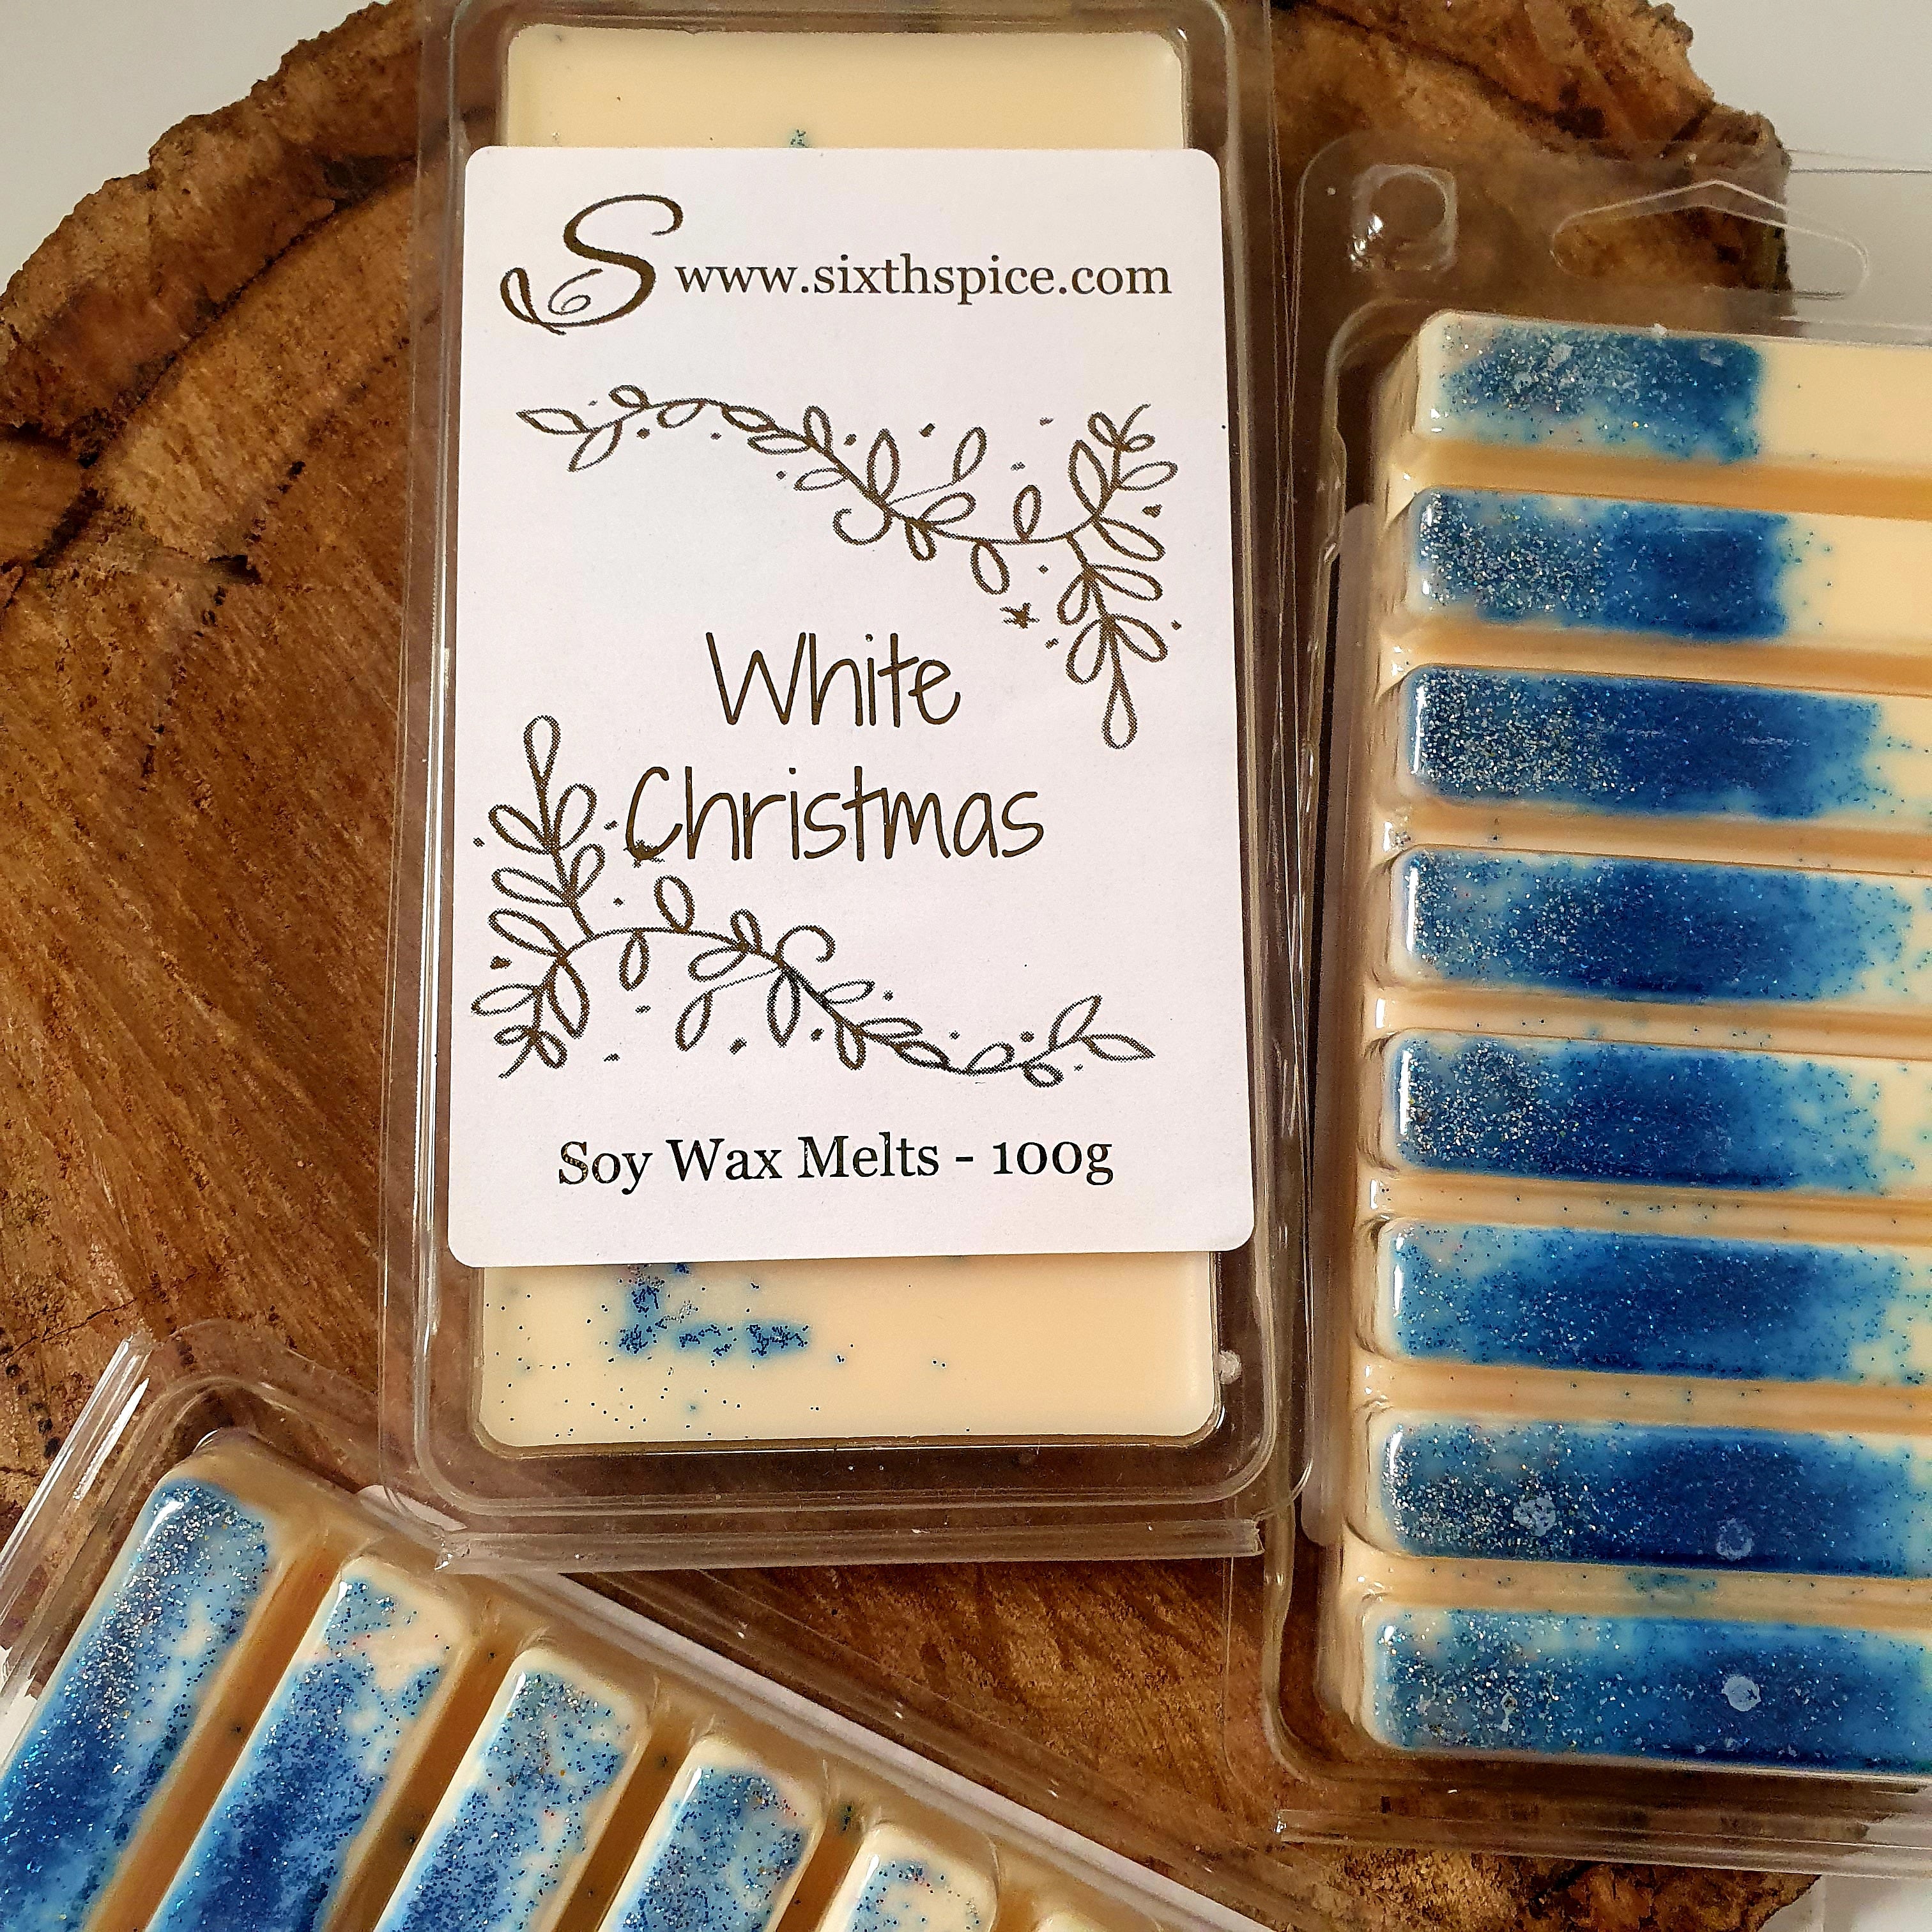 White Christmas - Soy Wax Melts – Sixth Spice - Feel Your Own